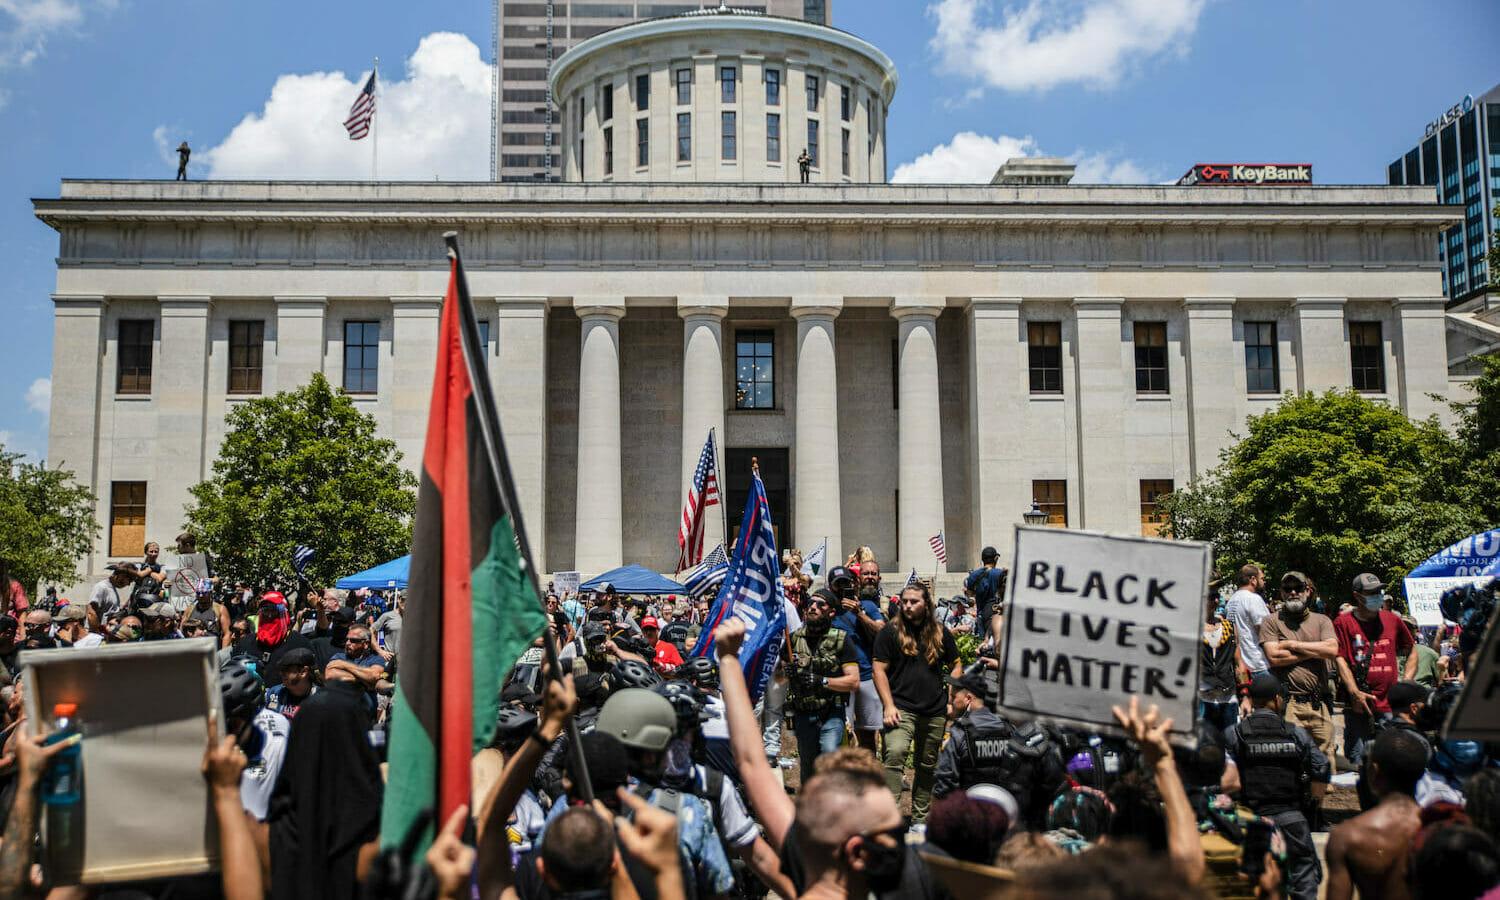 COLUMBUS, UNITED STATES &#8211; 2020/07/18: Anti-Mask protesters collide with Black Lives Matter counter-protesters during an &#8216;Anti-Mask&#8217; rally, Black Lives Matter protest at Ohio Statehouse.
Over 200 people gathered at the Ohio State House to protest against the face mask mandate that multiple counties are under in the state. (Photo by...